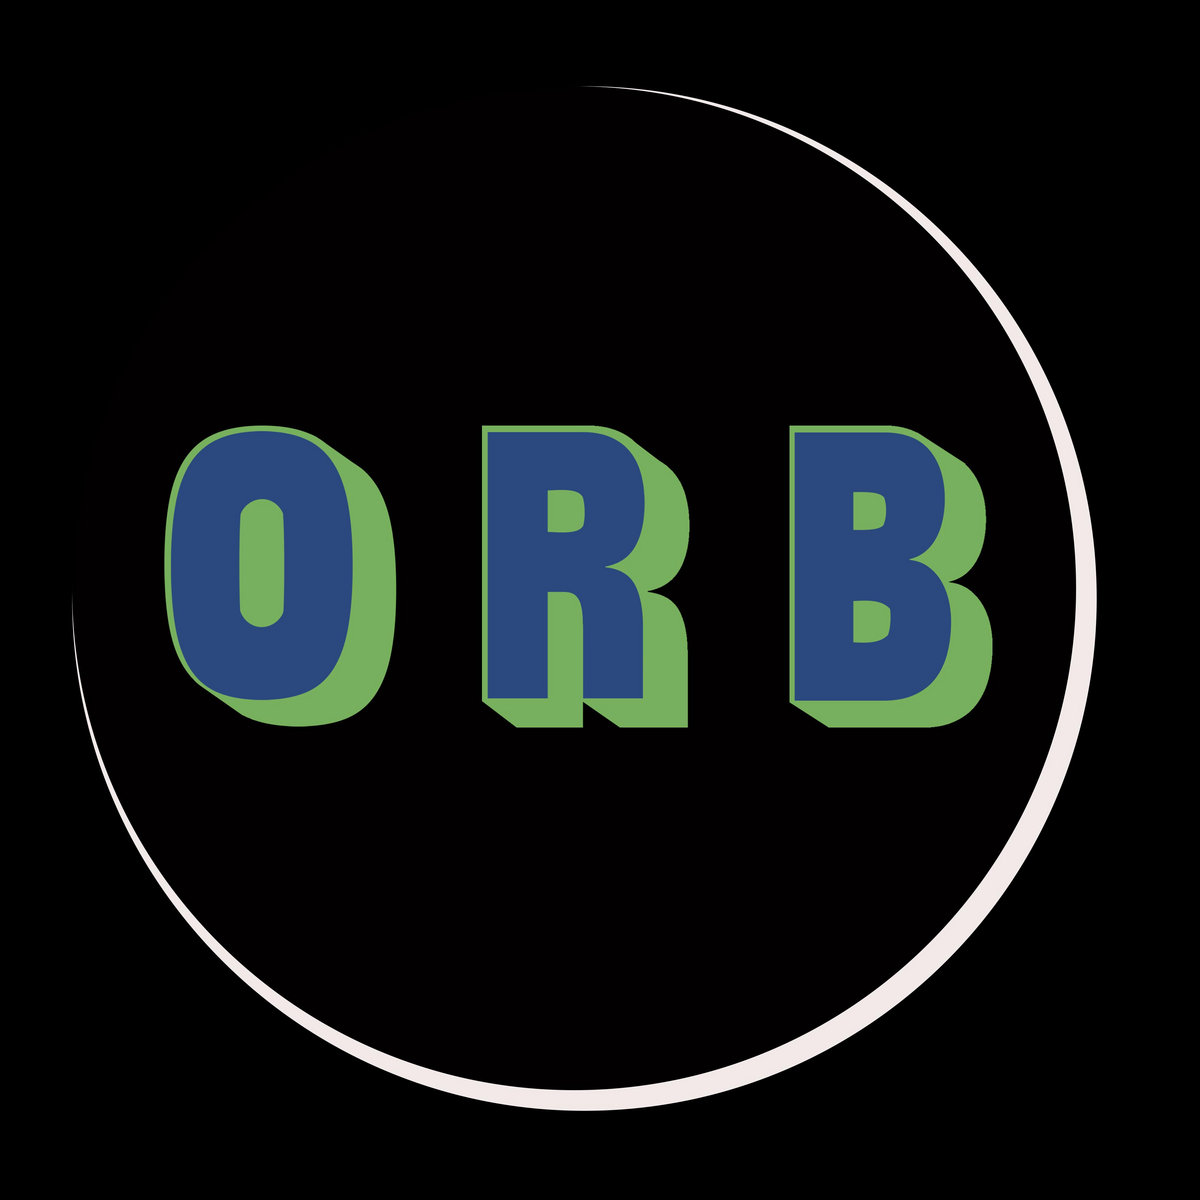 Reflection | ORB